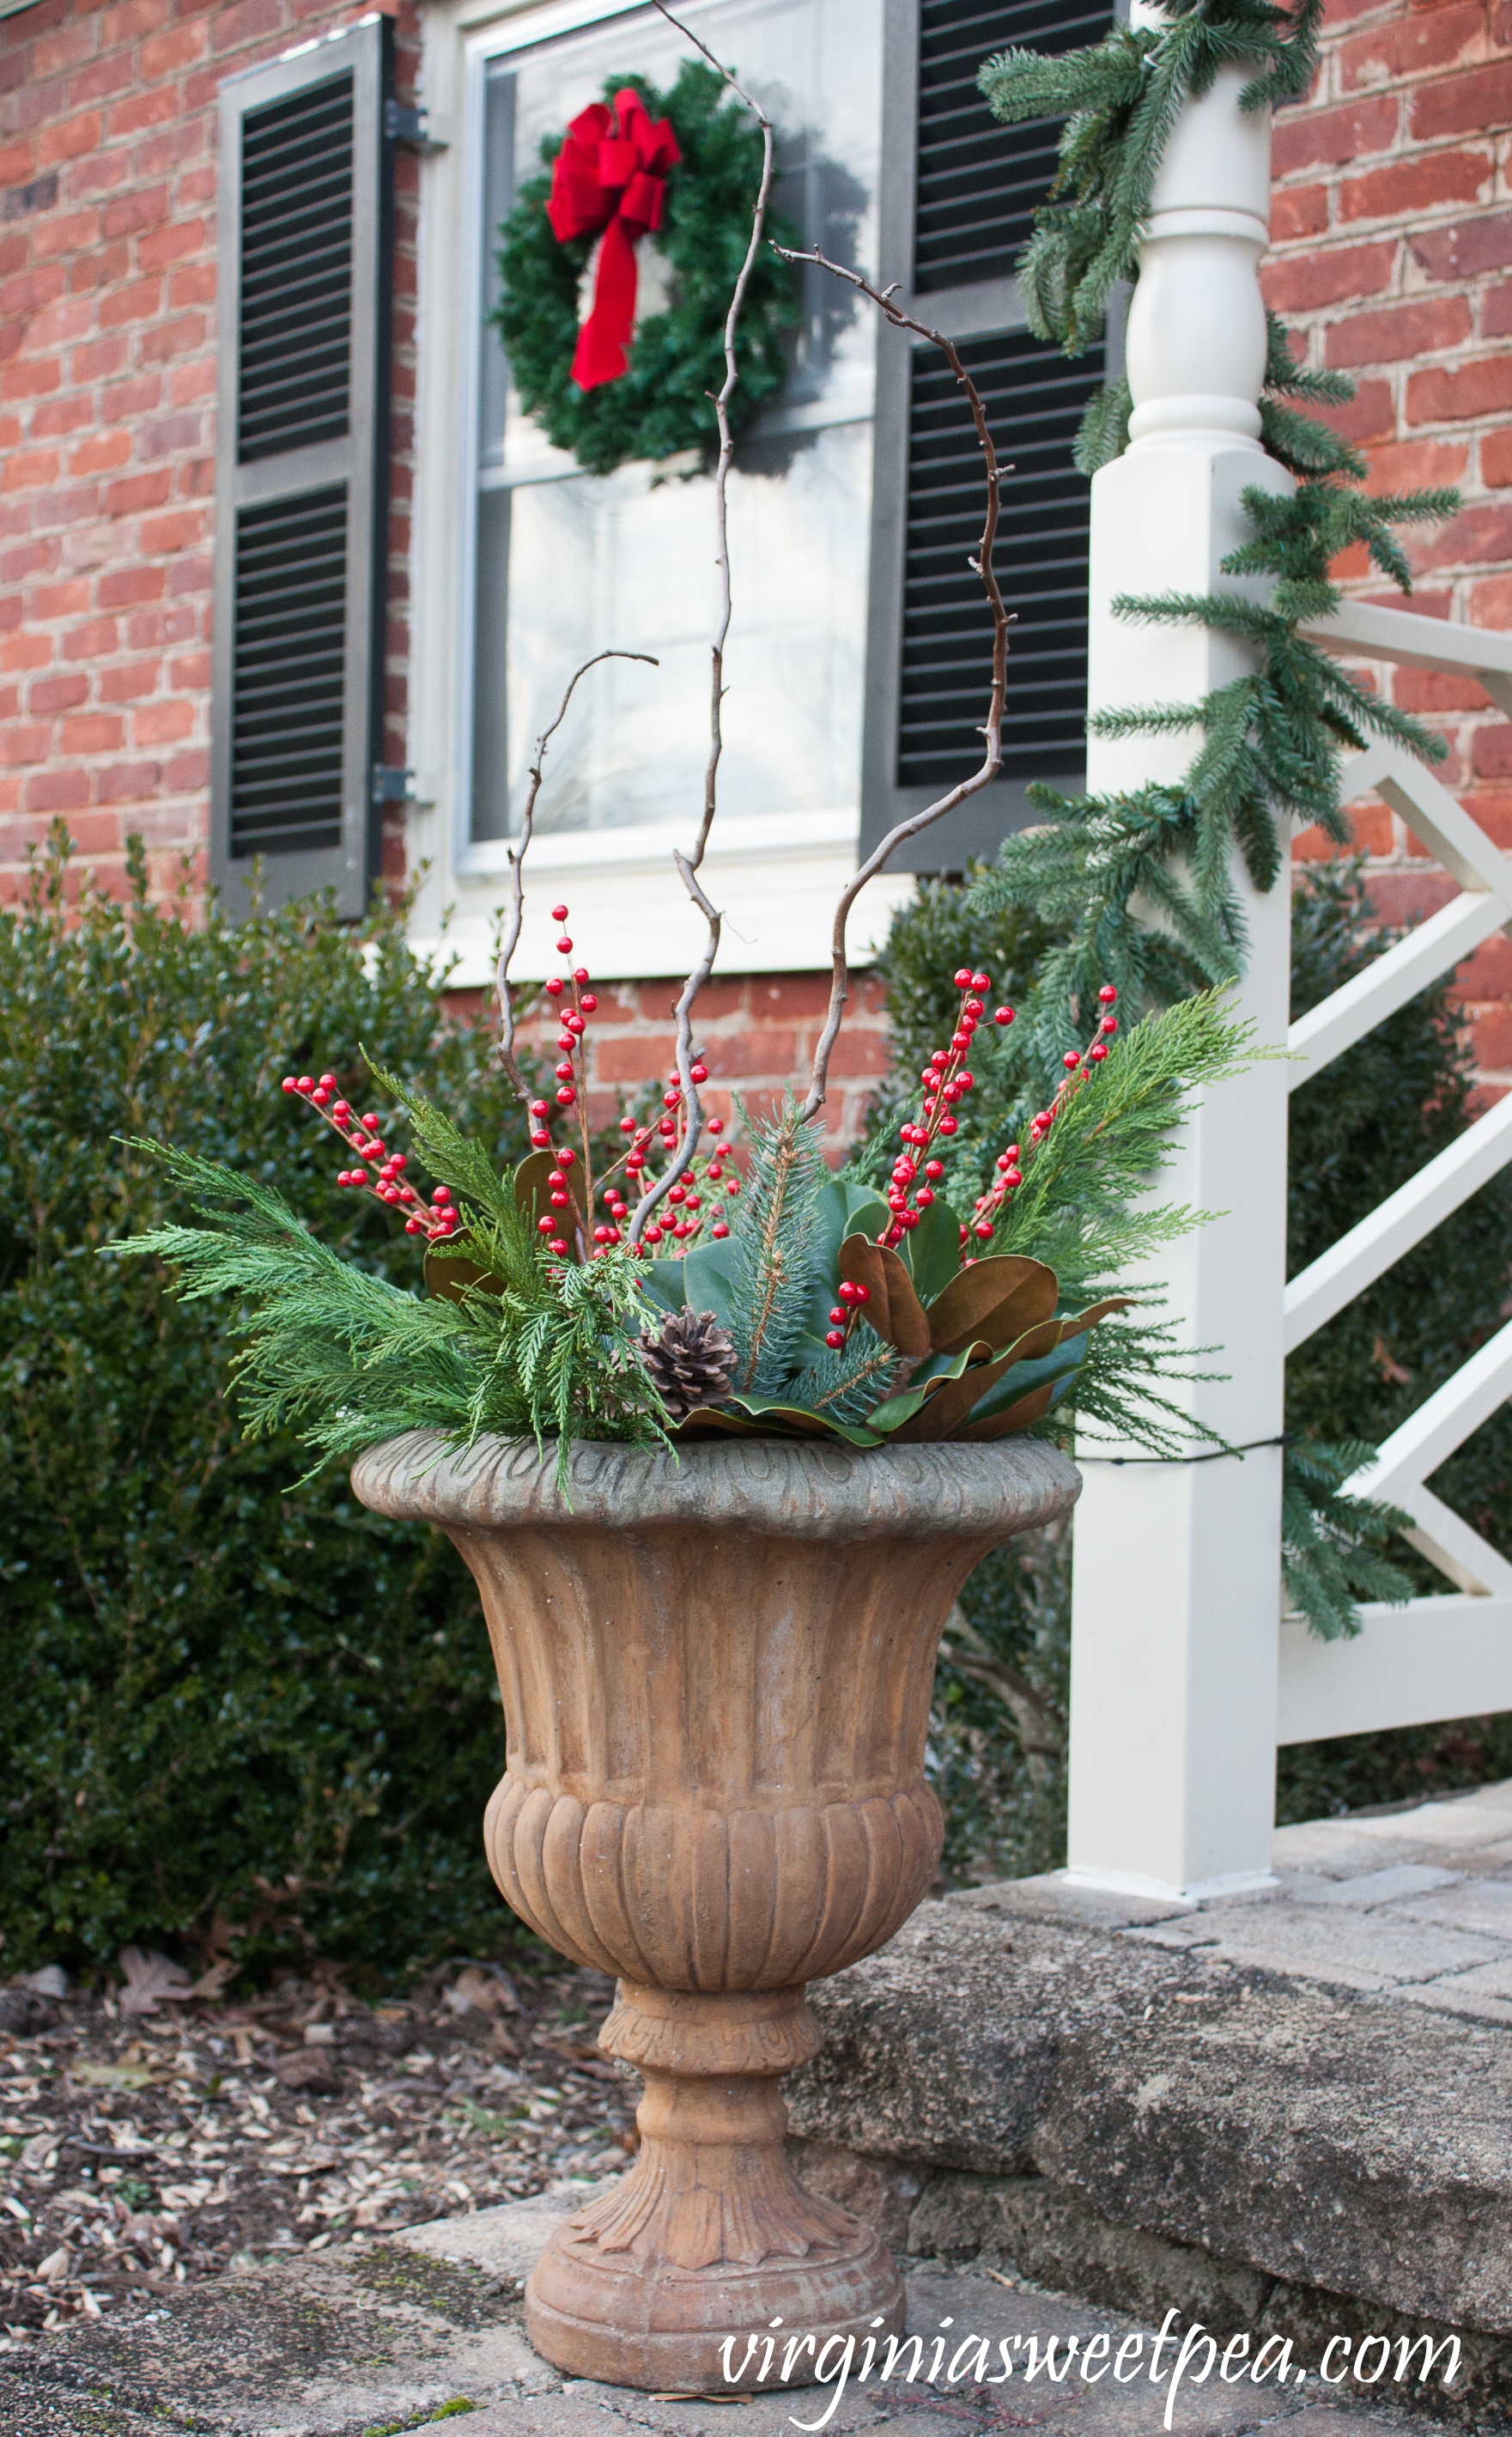 Christmas Front Porch and Holiday Door Decor - Urns filled with greenery, berries, and curly willow for Christmas. #christmas #christmasurns #christmasdoors #christmasoutdoors #christmasdecor